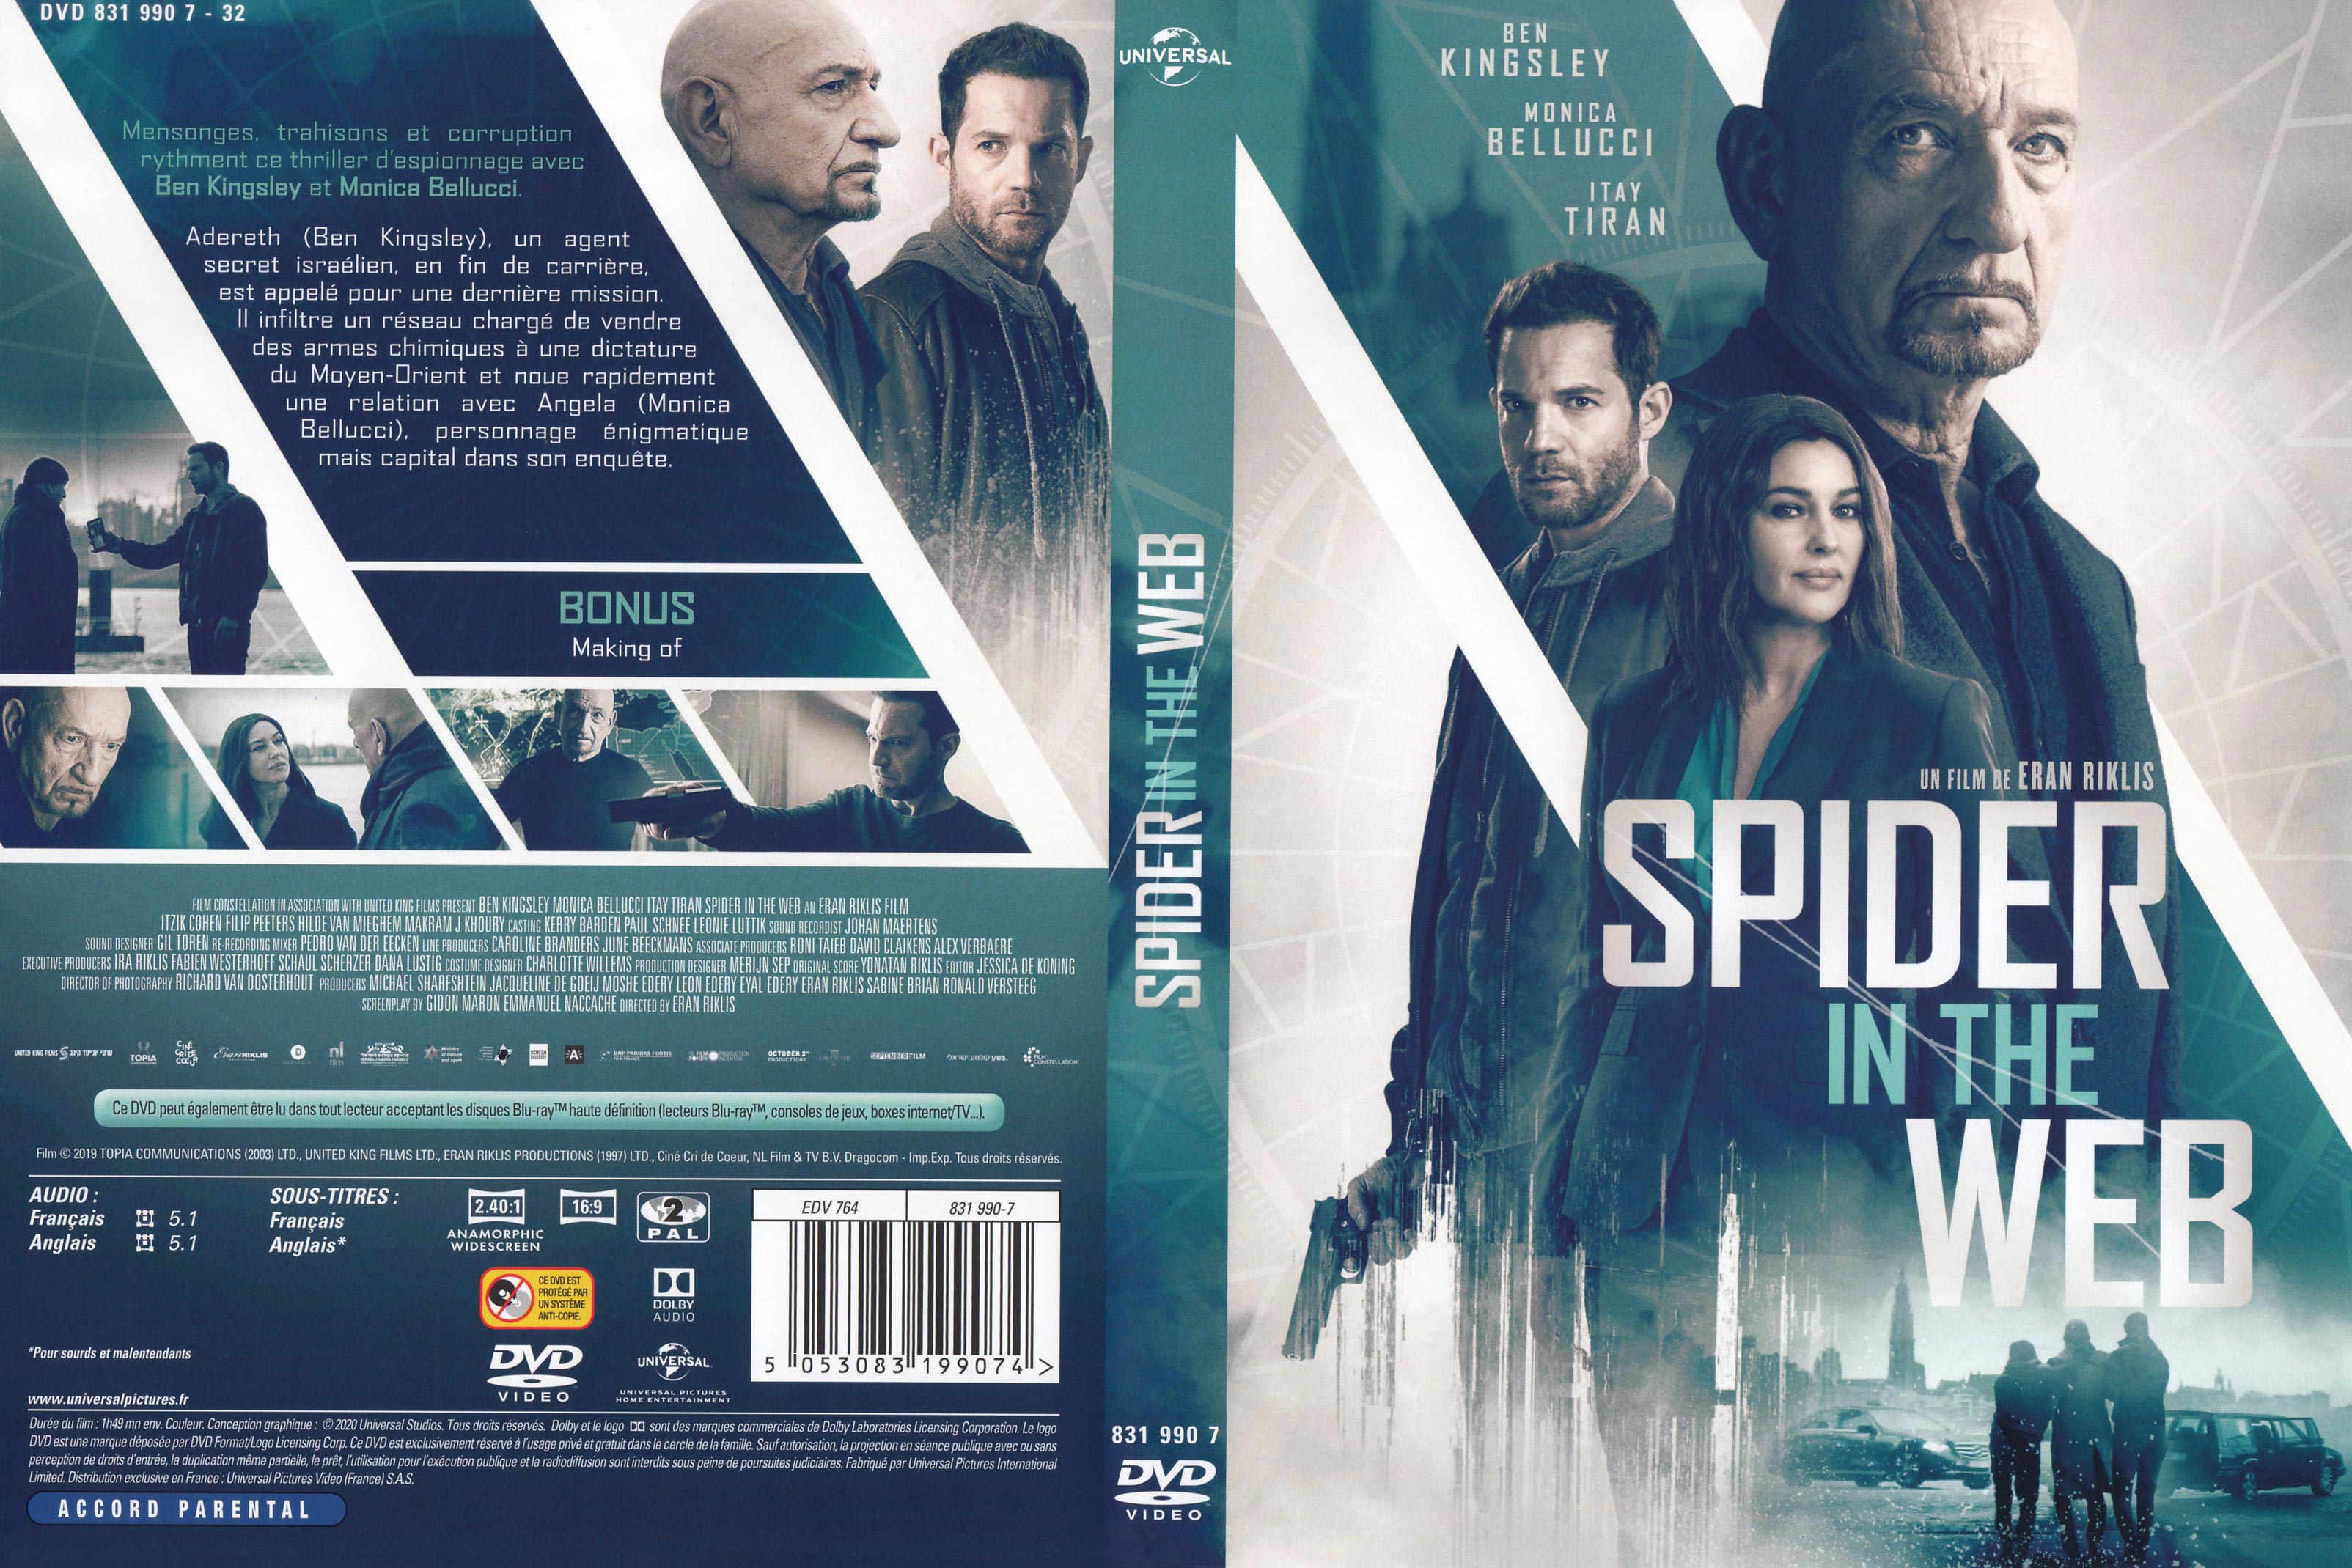 Jaquette DVD Spider in the web